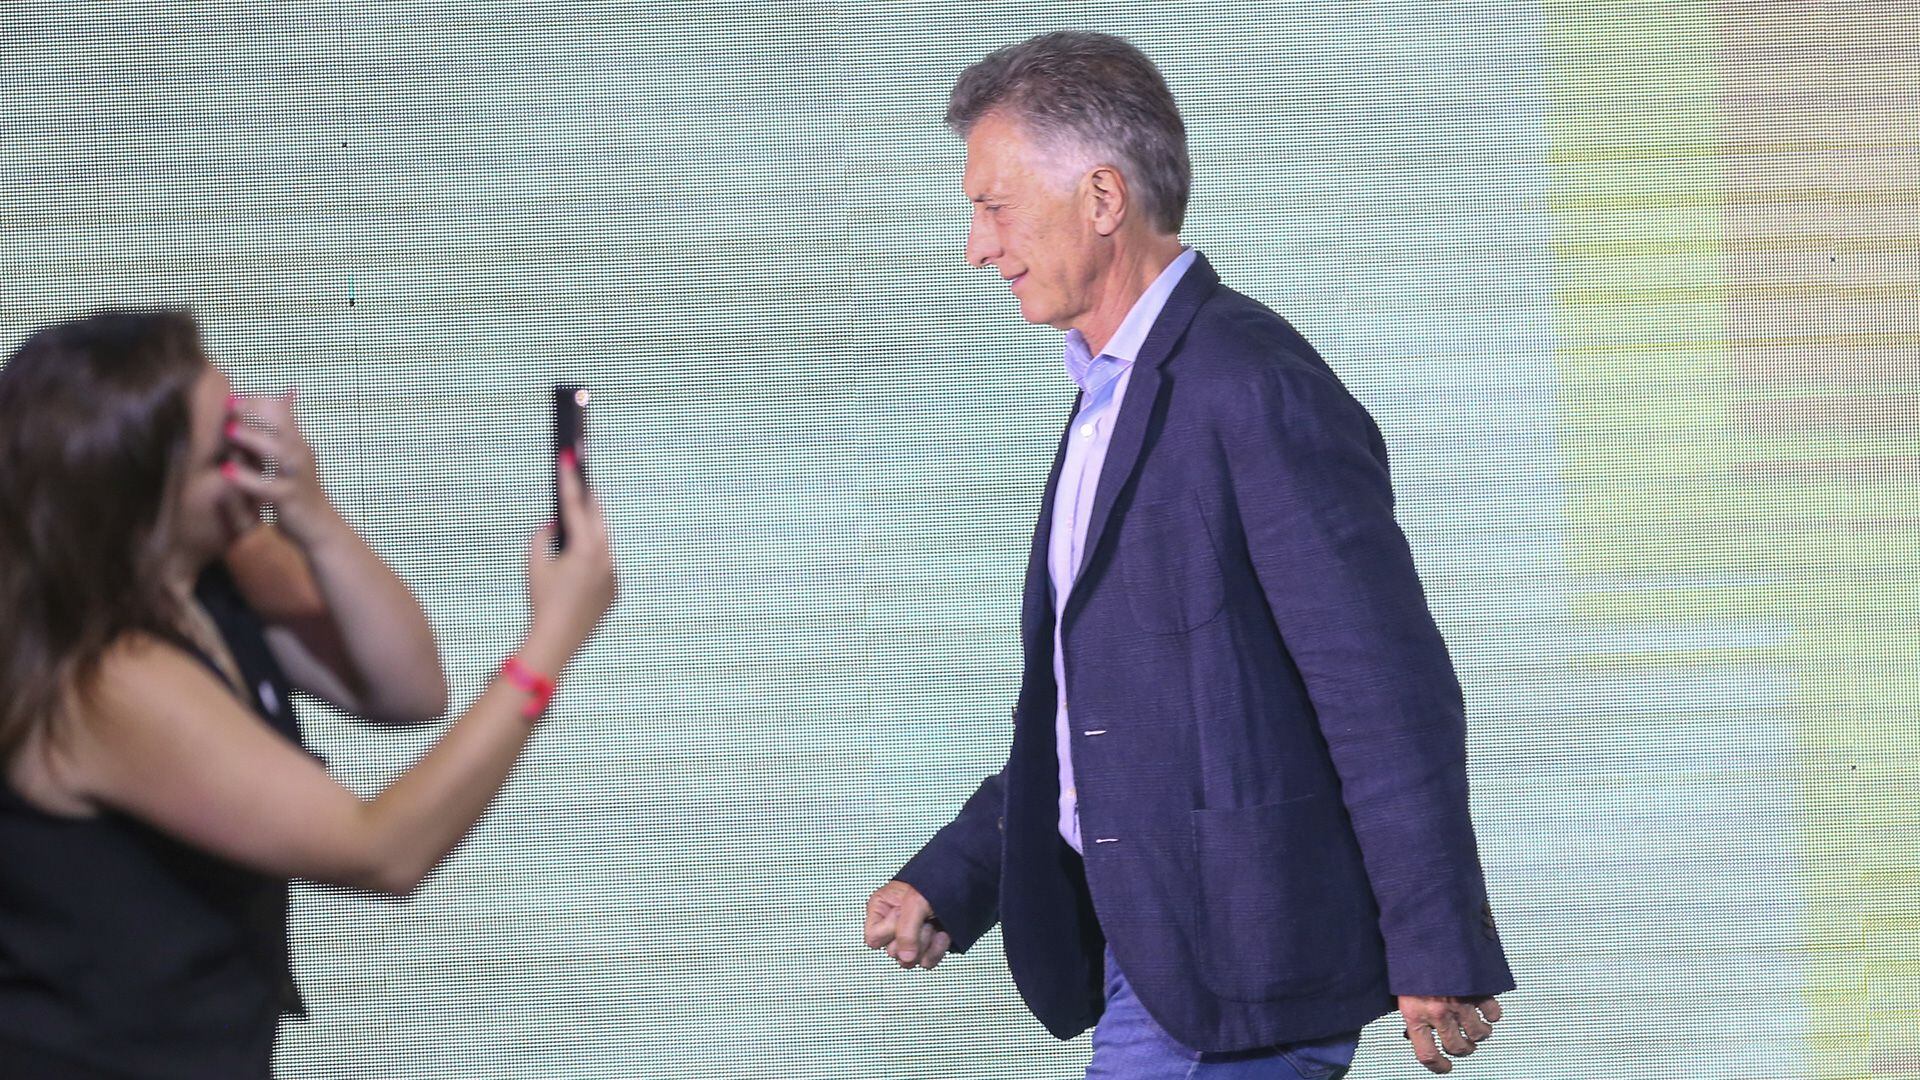 Mauricio Macri leaves the JxC bunker stage after Patricia Bullrich's final speech (AP Photo)